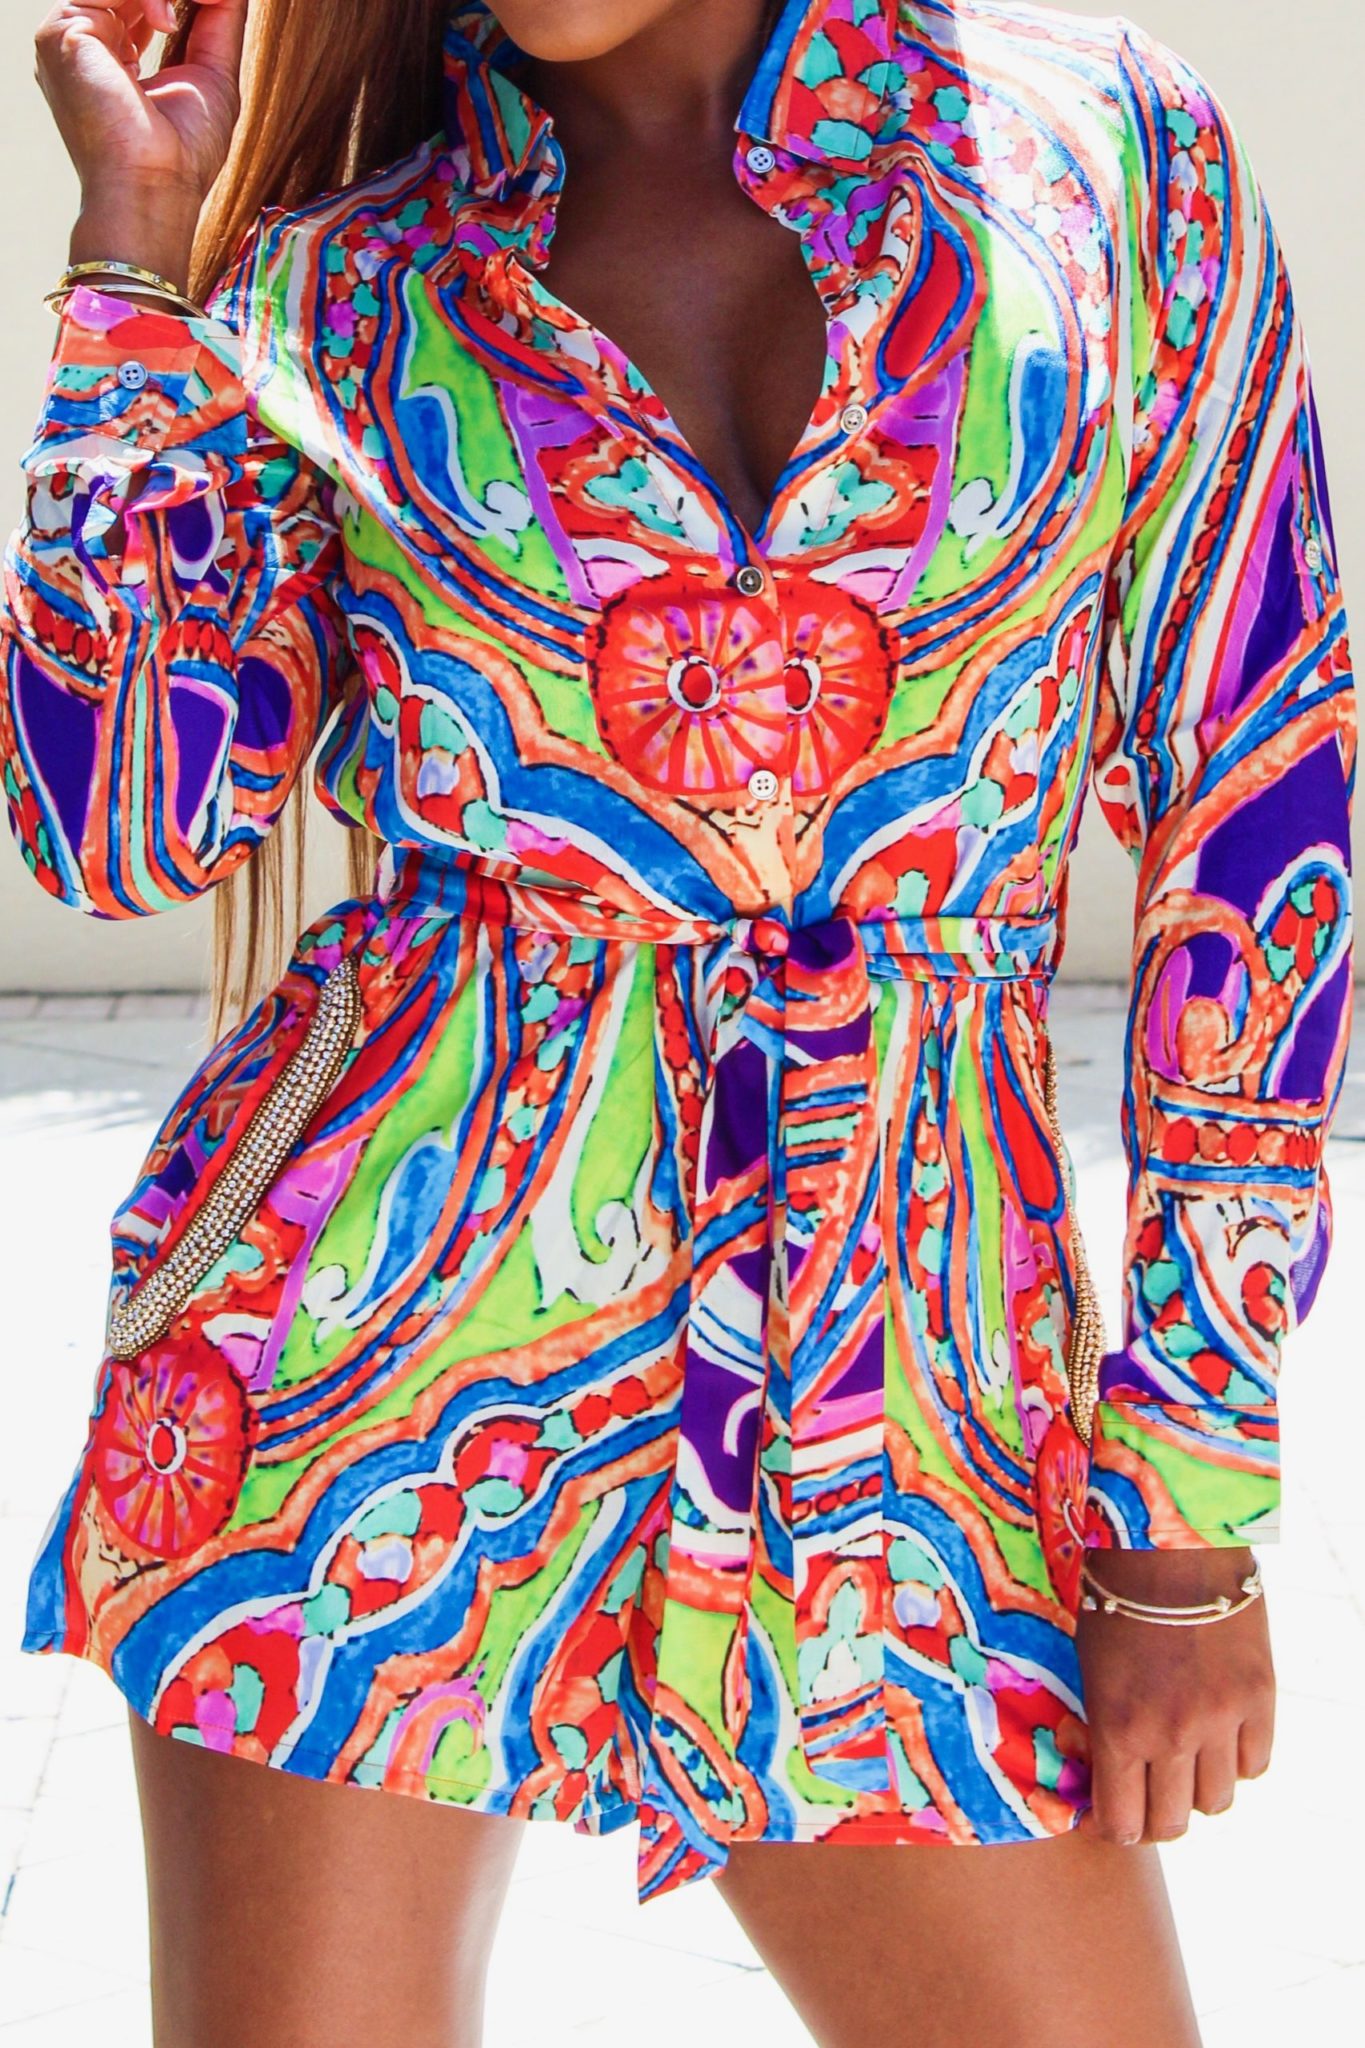 Women's Tie Front Print Romper - Best Soft Jumpsuits vacation romper luxurious vacation wear brunch outfit